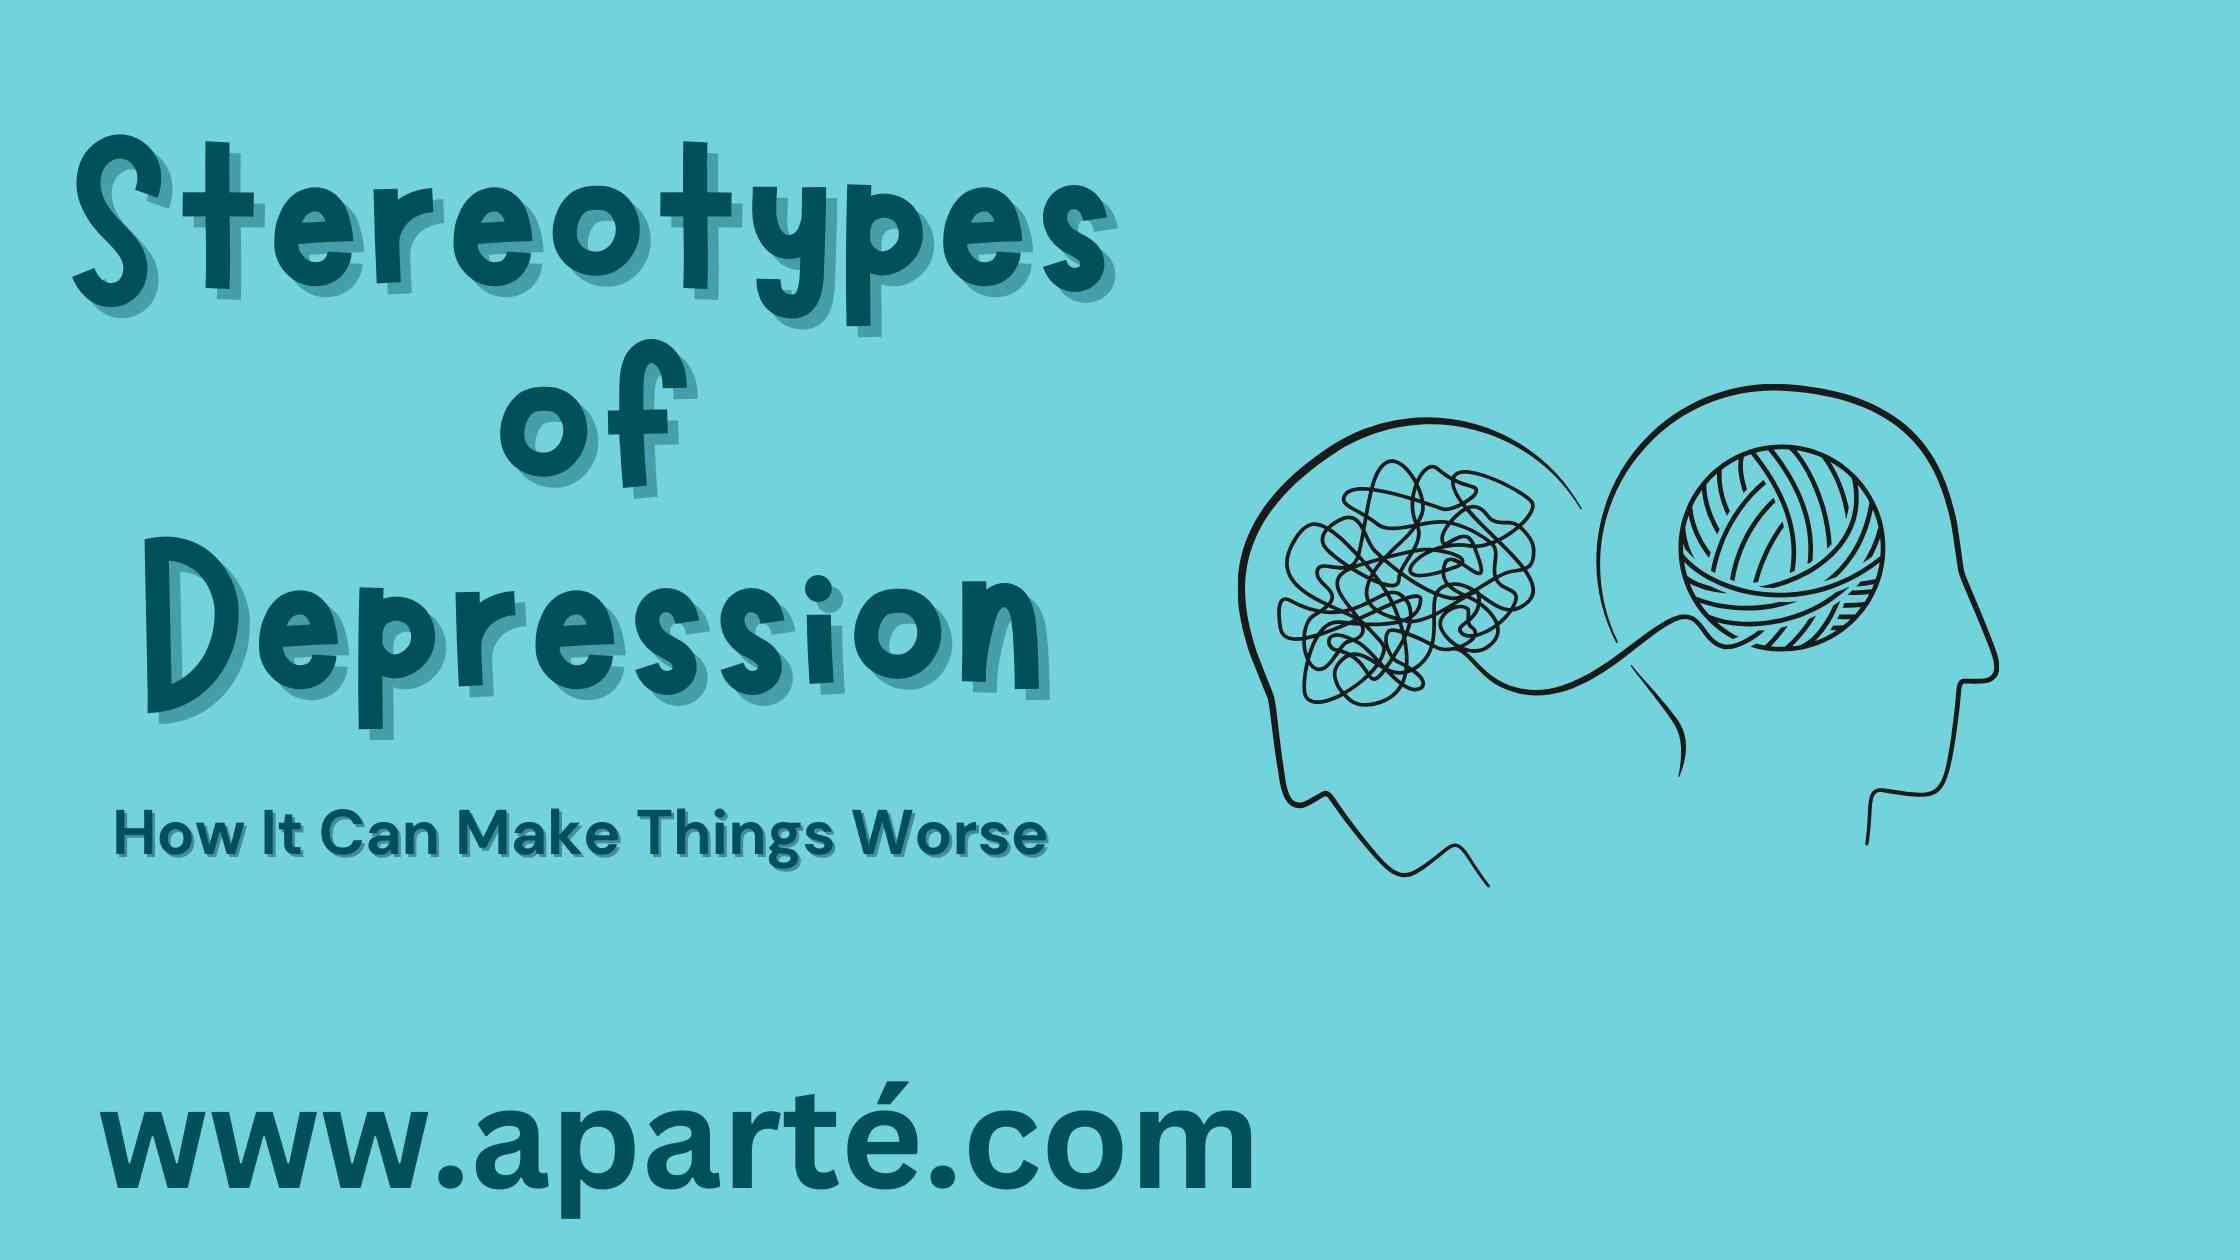 Stereotypes of Depression